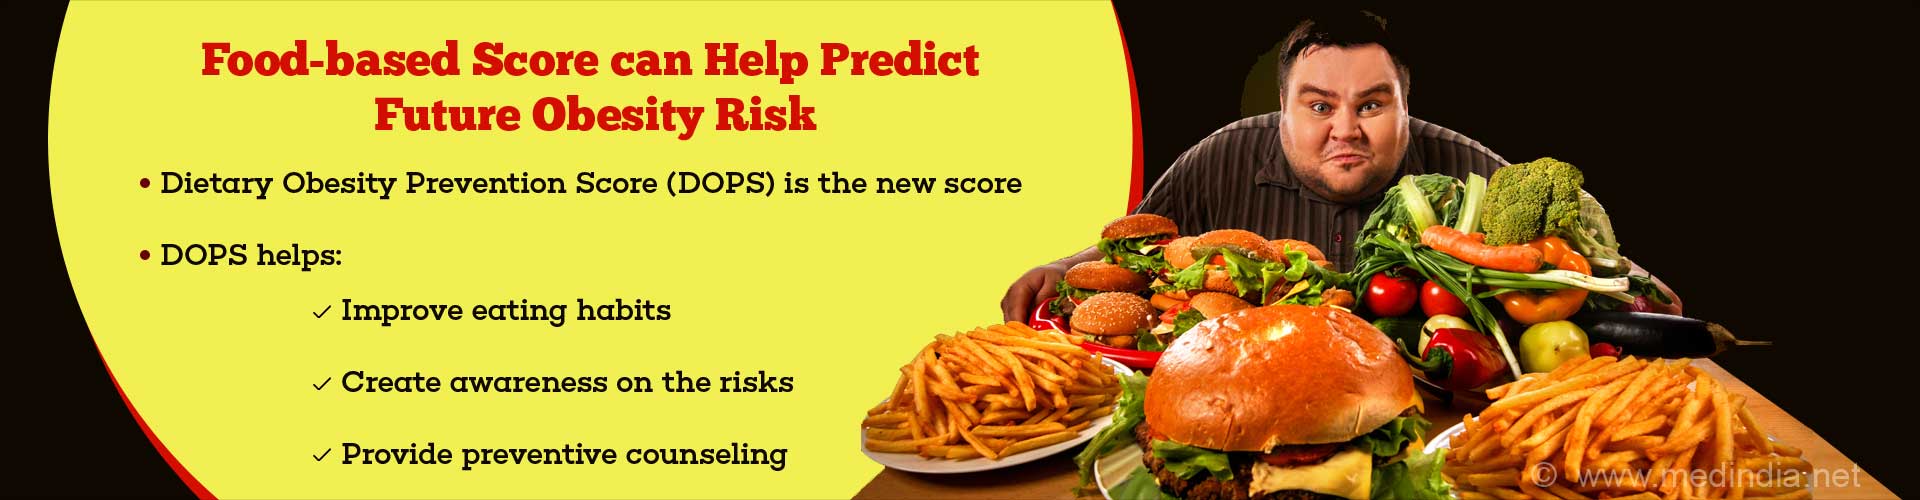 Food-Based Score can help predict future obesity risk. Dietary Obesity Prevention Score (DOPS) is the new score. DOPS helps improve eating habits, create awareness on the risks and provide preventive counseling.
